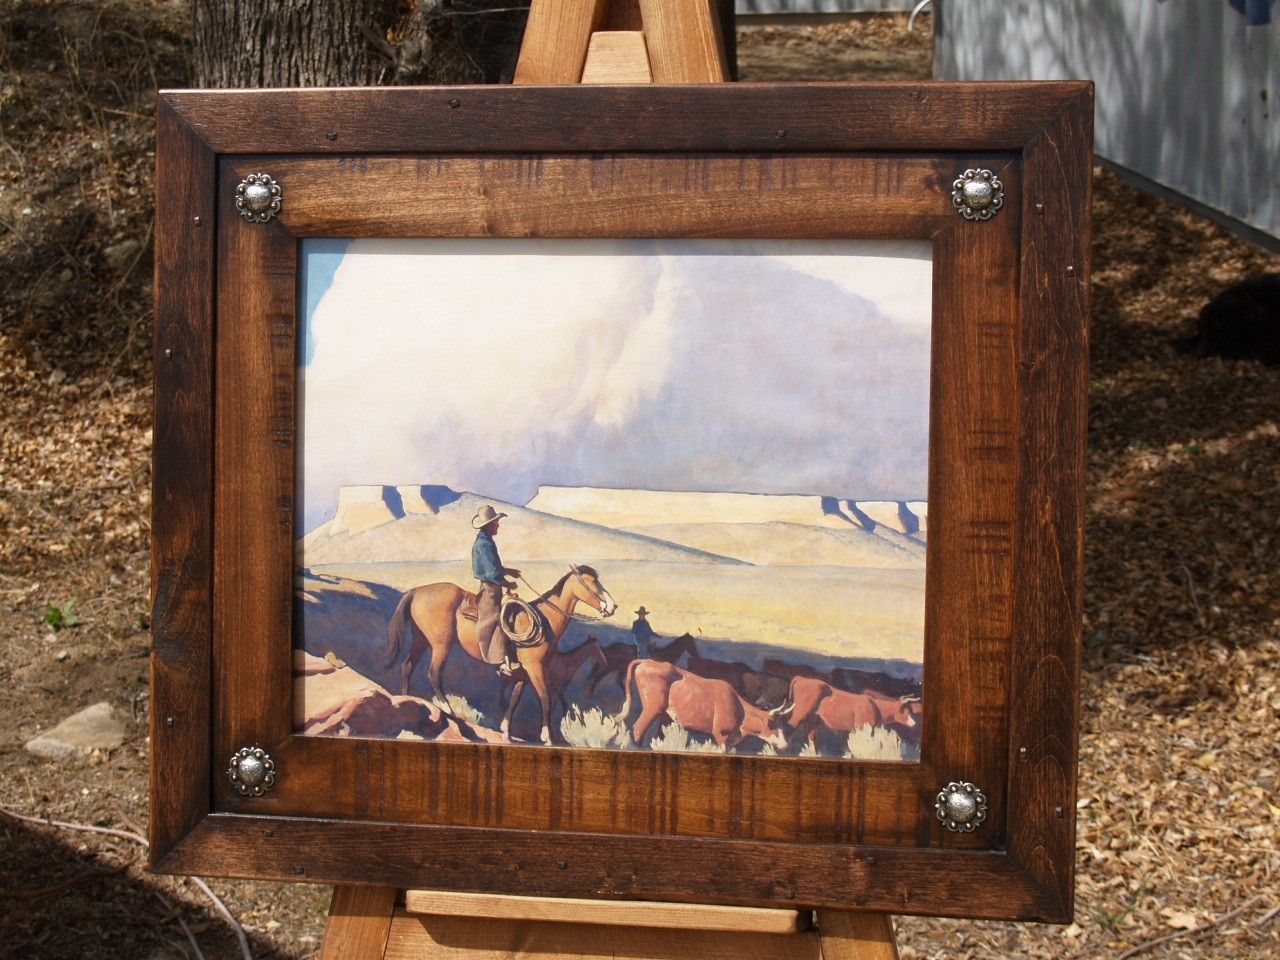 Handmade Picture Frame by Art Of Wood | CustomMade.com